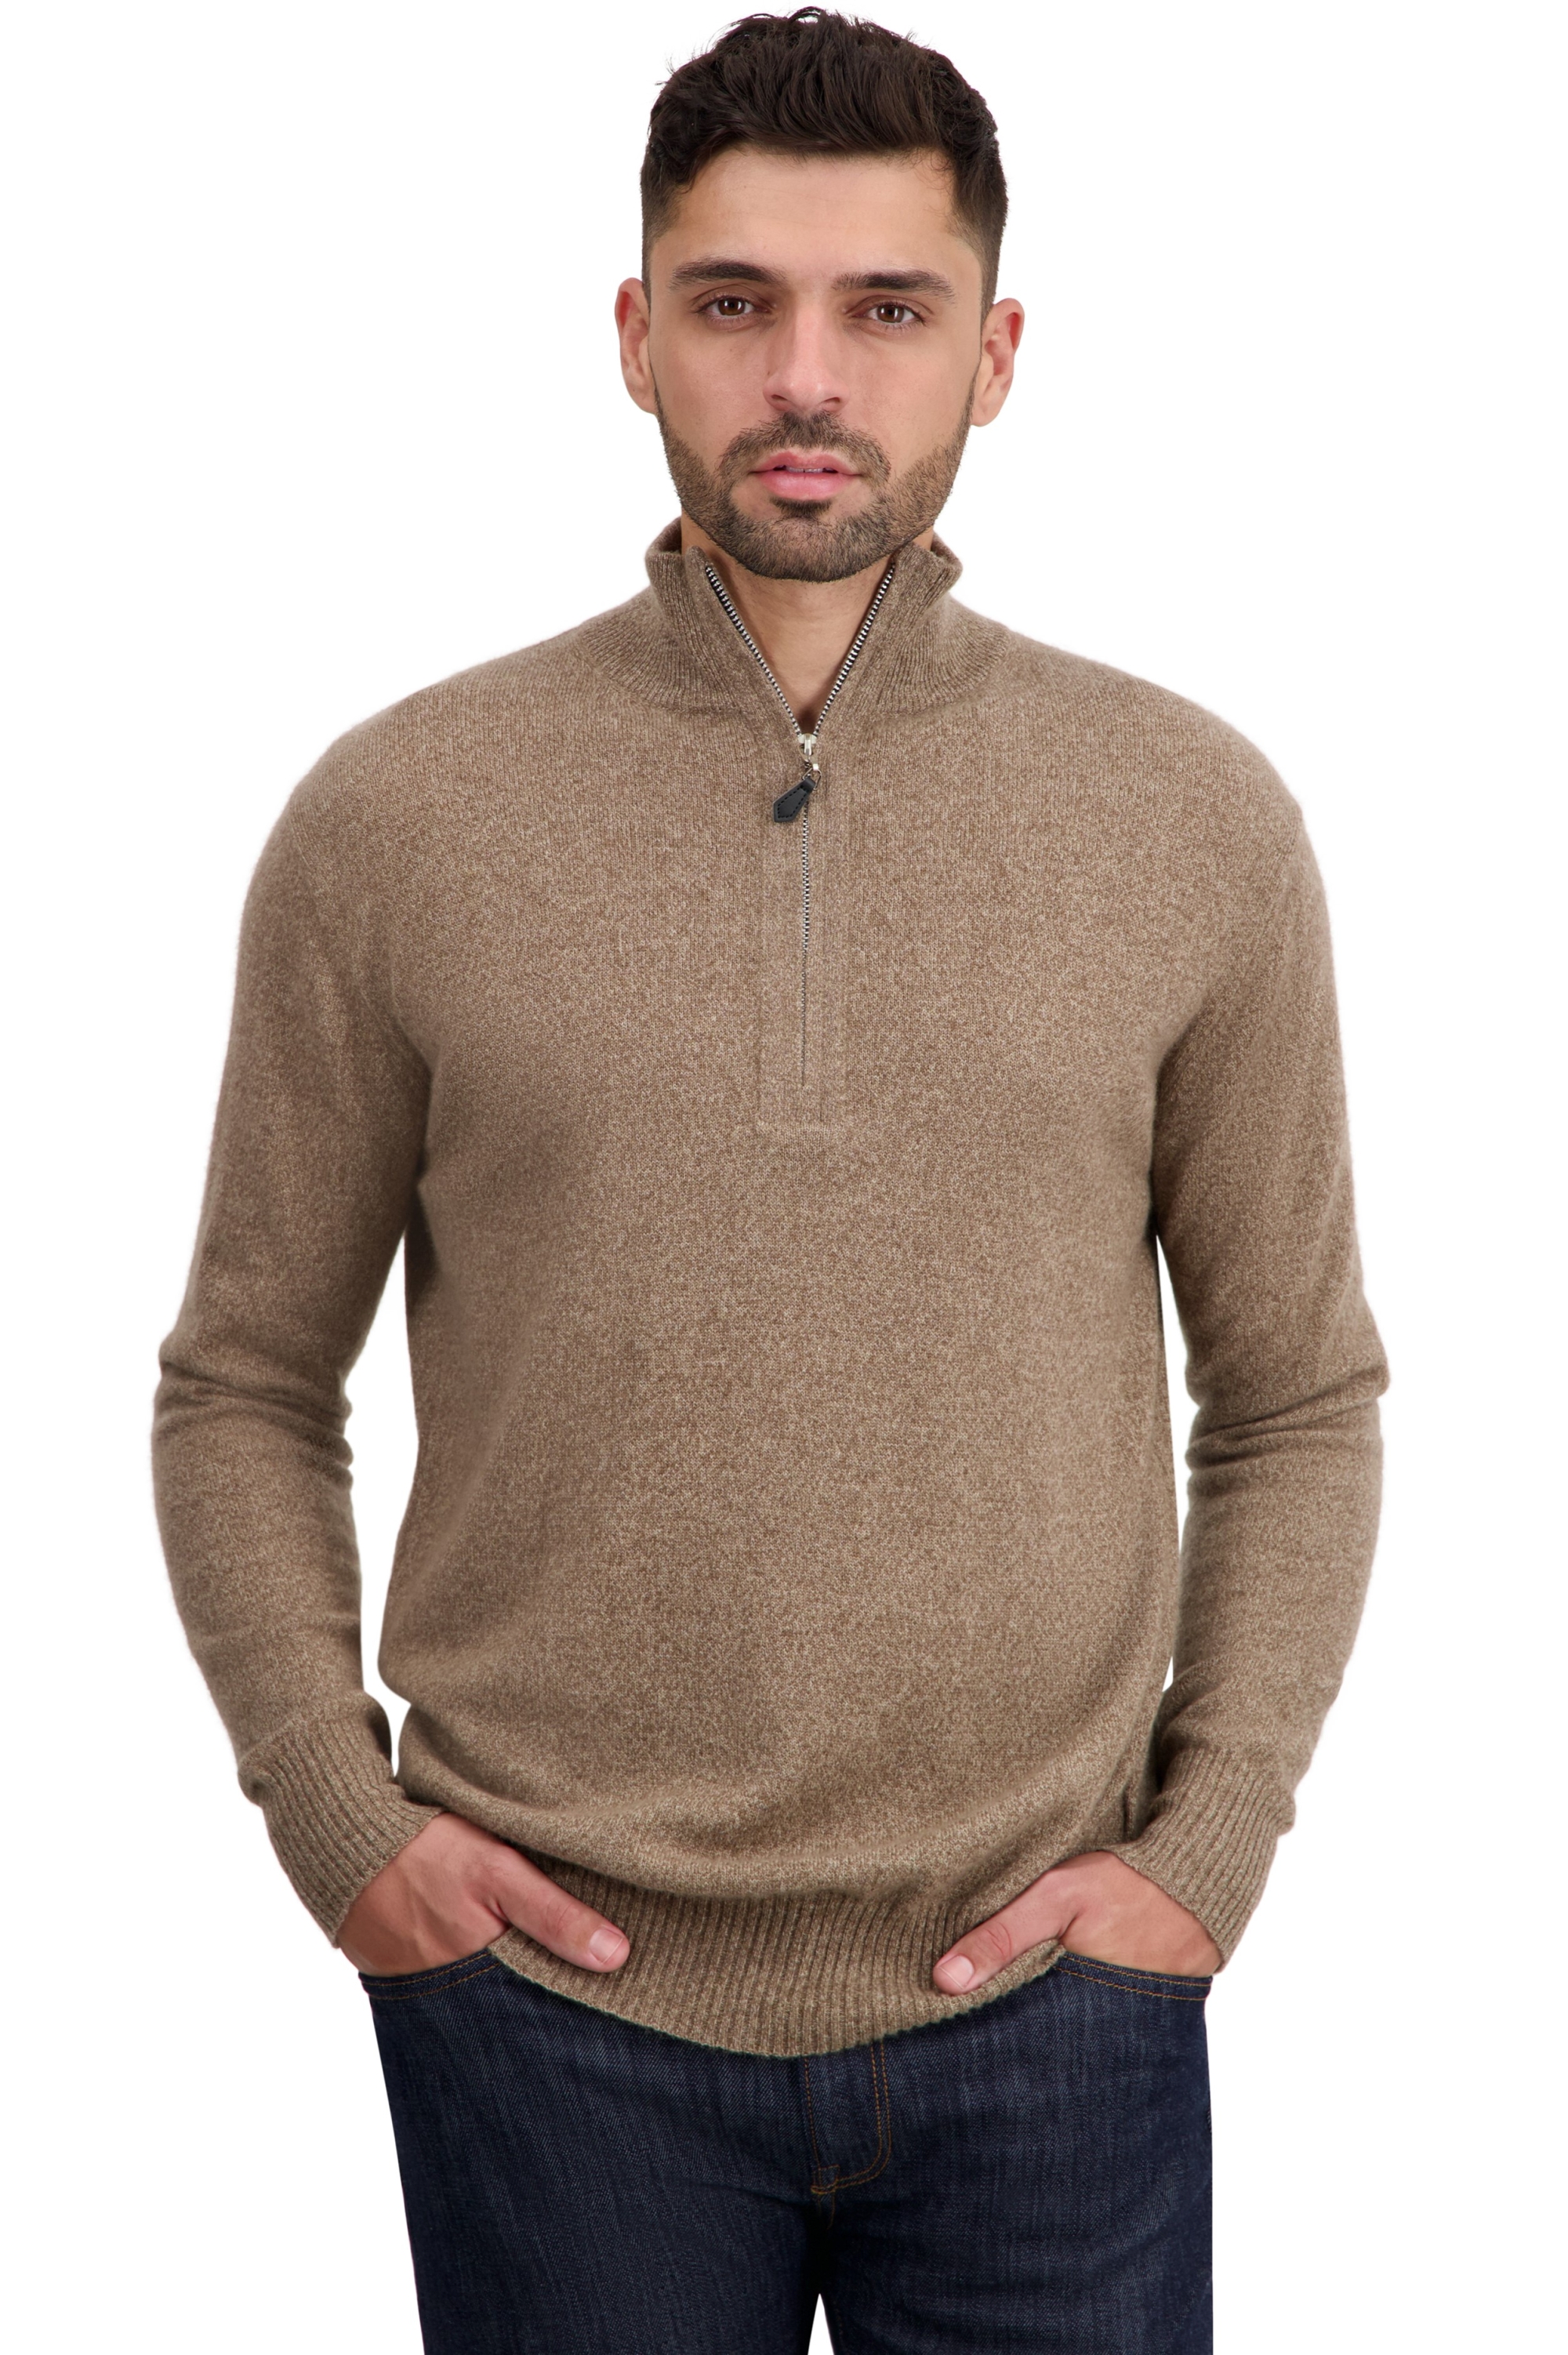 Cachemire pull homme toulon first tan marl m